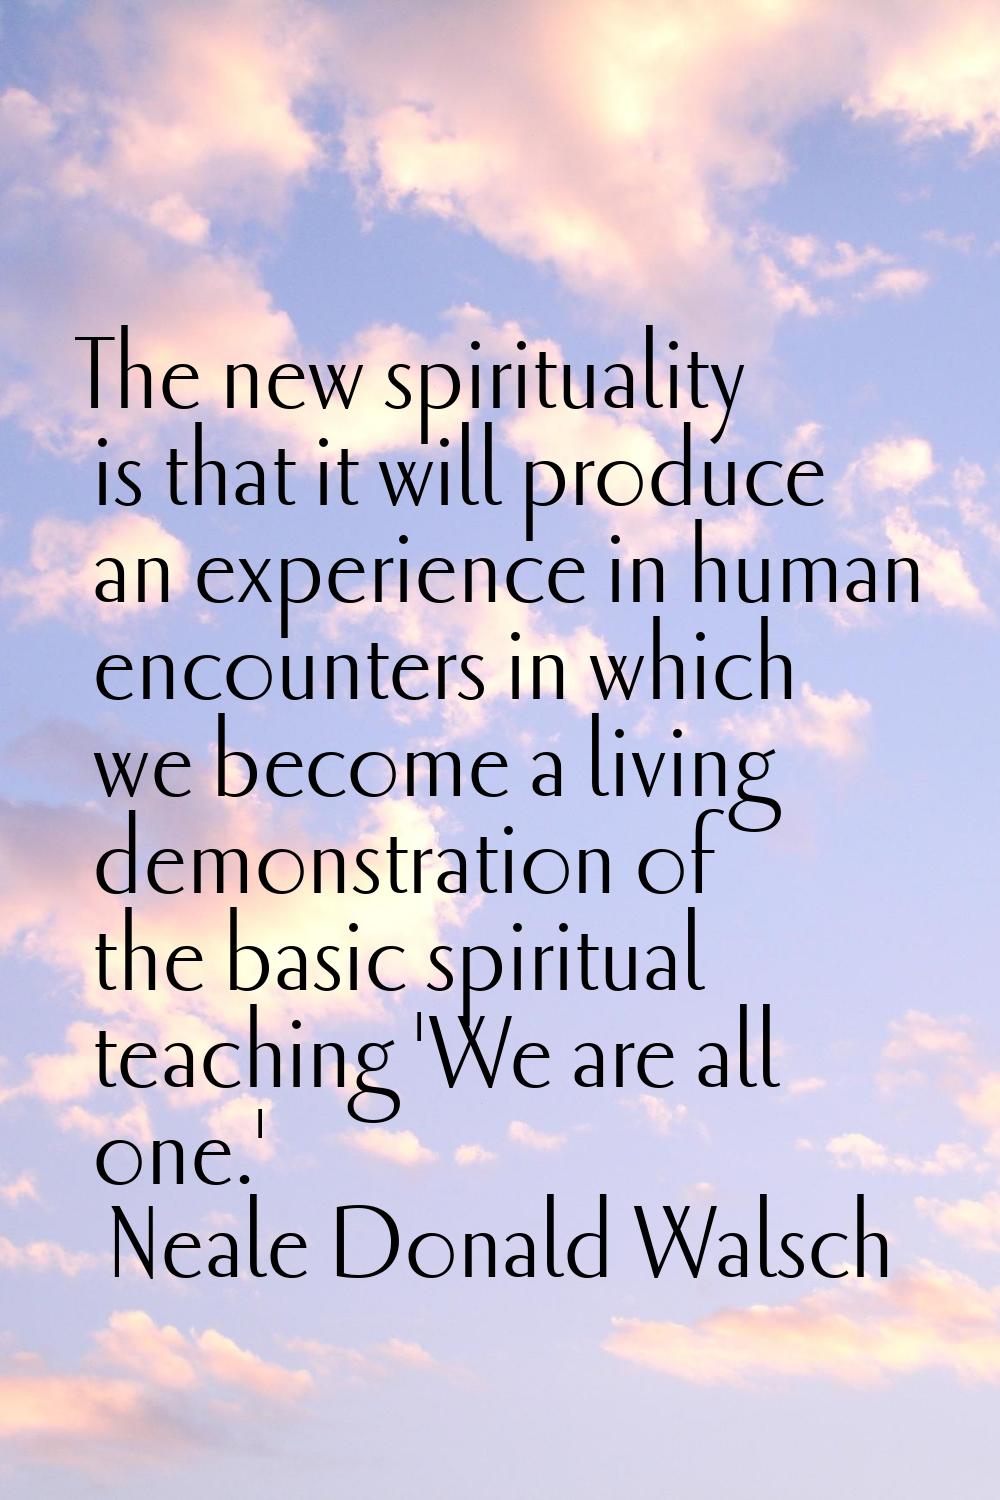 The new spirituality is that it will produce an experience in human encounters in which we become a